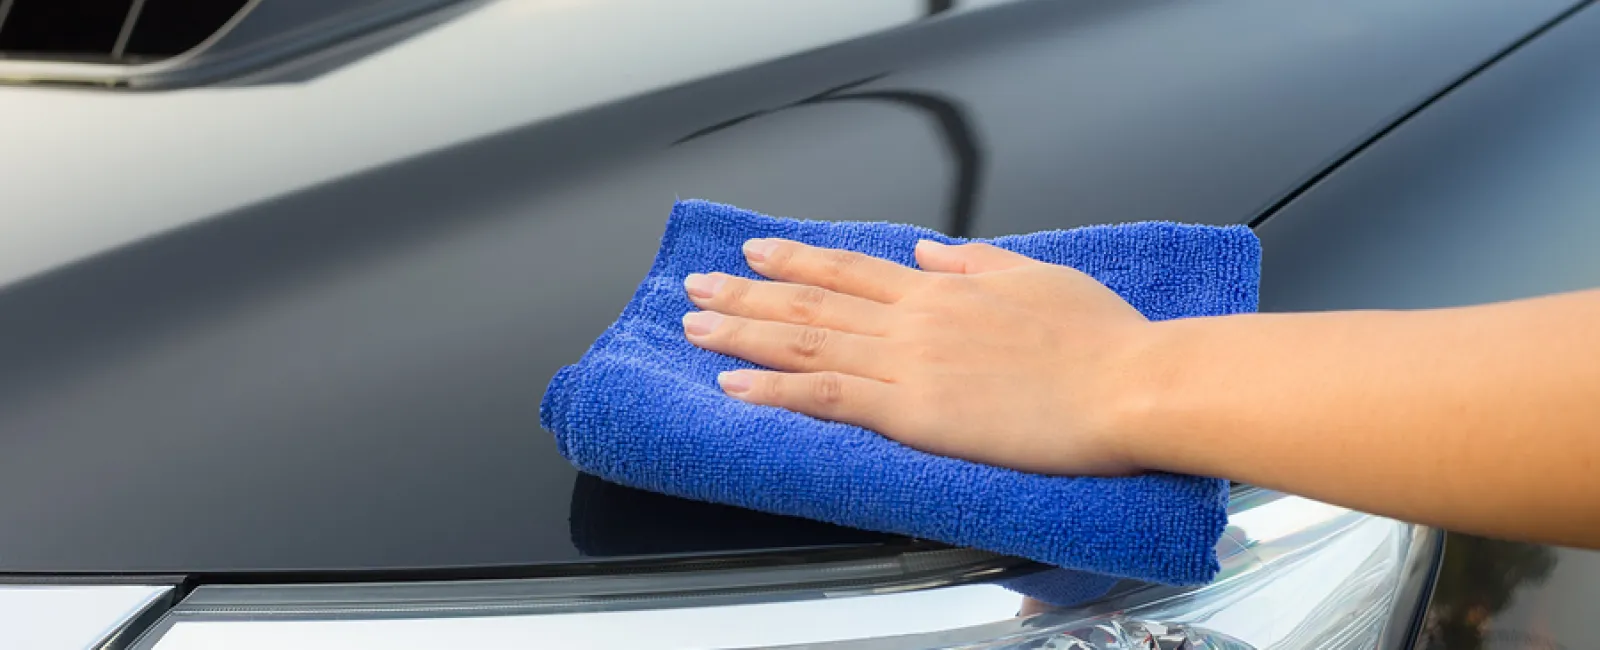 Clean Car Wash Towels Are the Secrets to Success